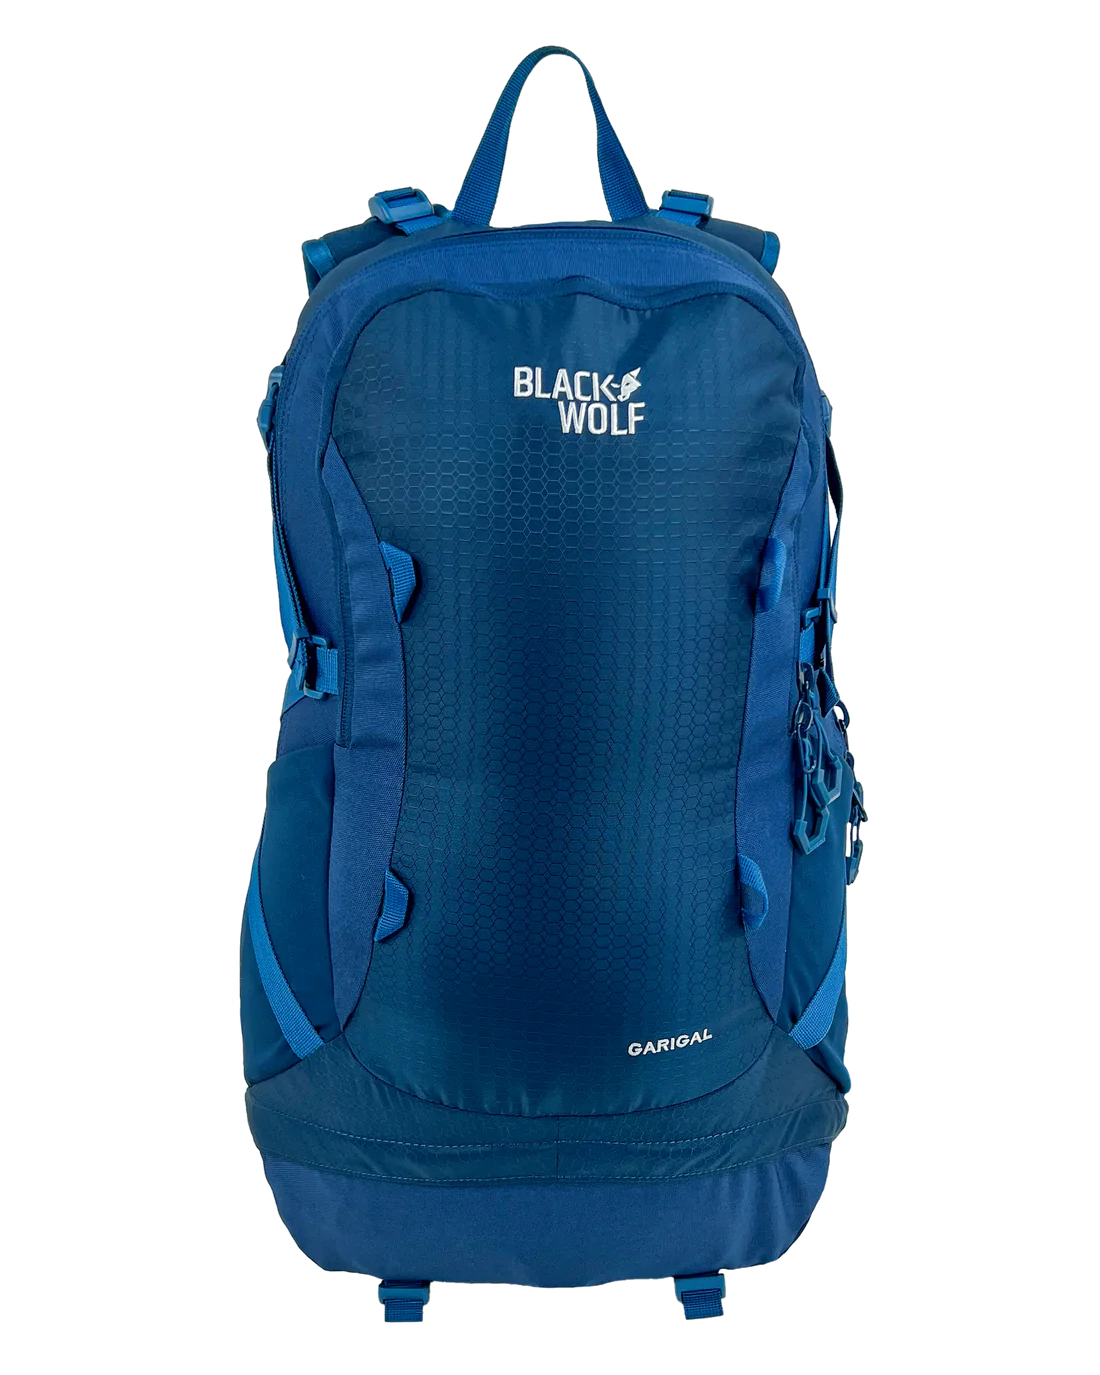 BlackWolf Garigal Day Pack - 30 Litres